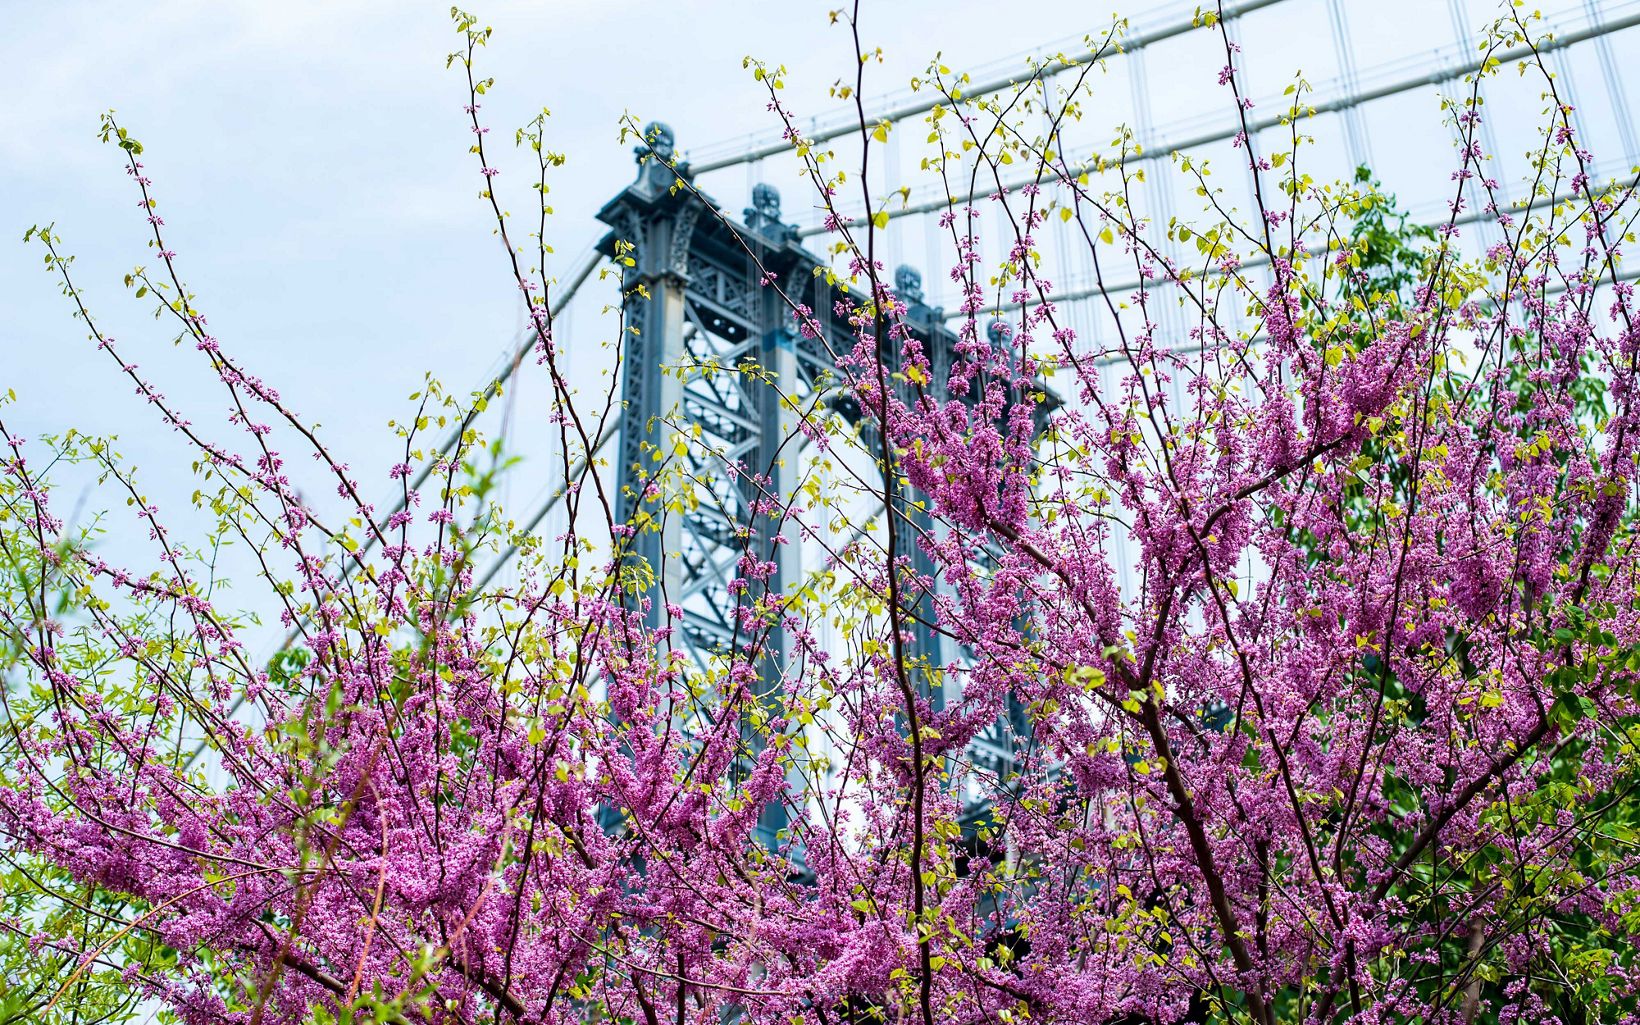 A bush covered in tiny purple flowers blooms with the Brooklyn Bridge in the background.